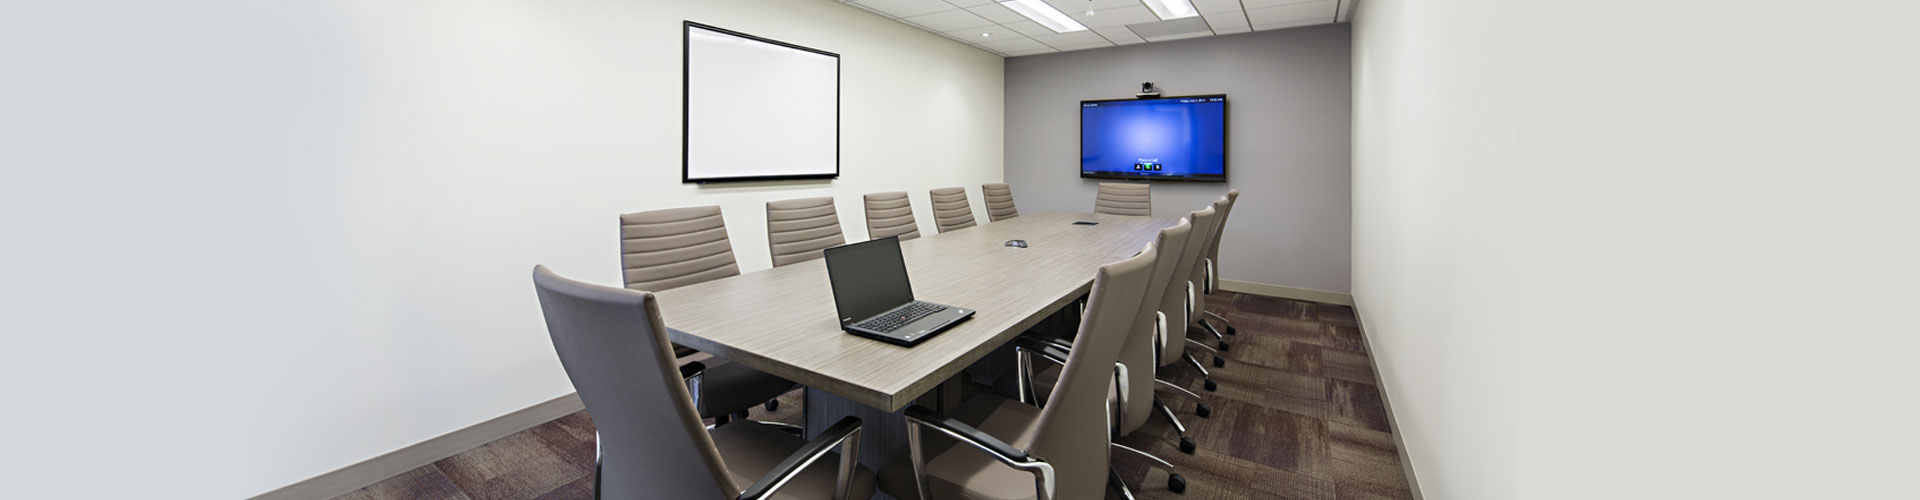 Tustin-conference-room